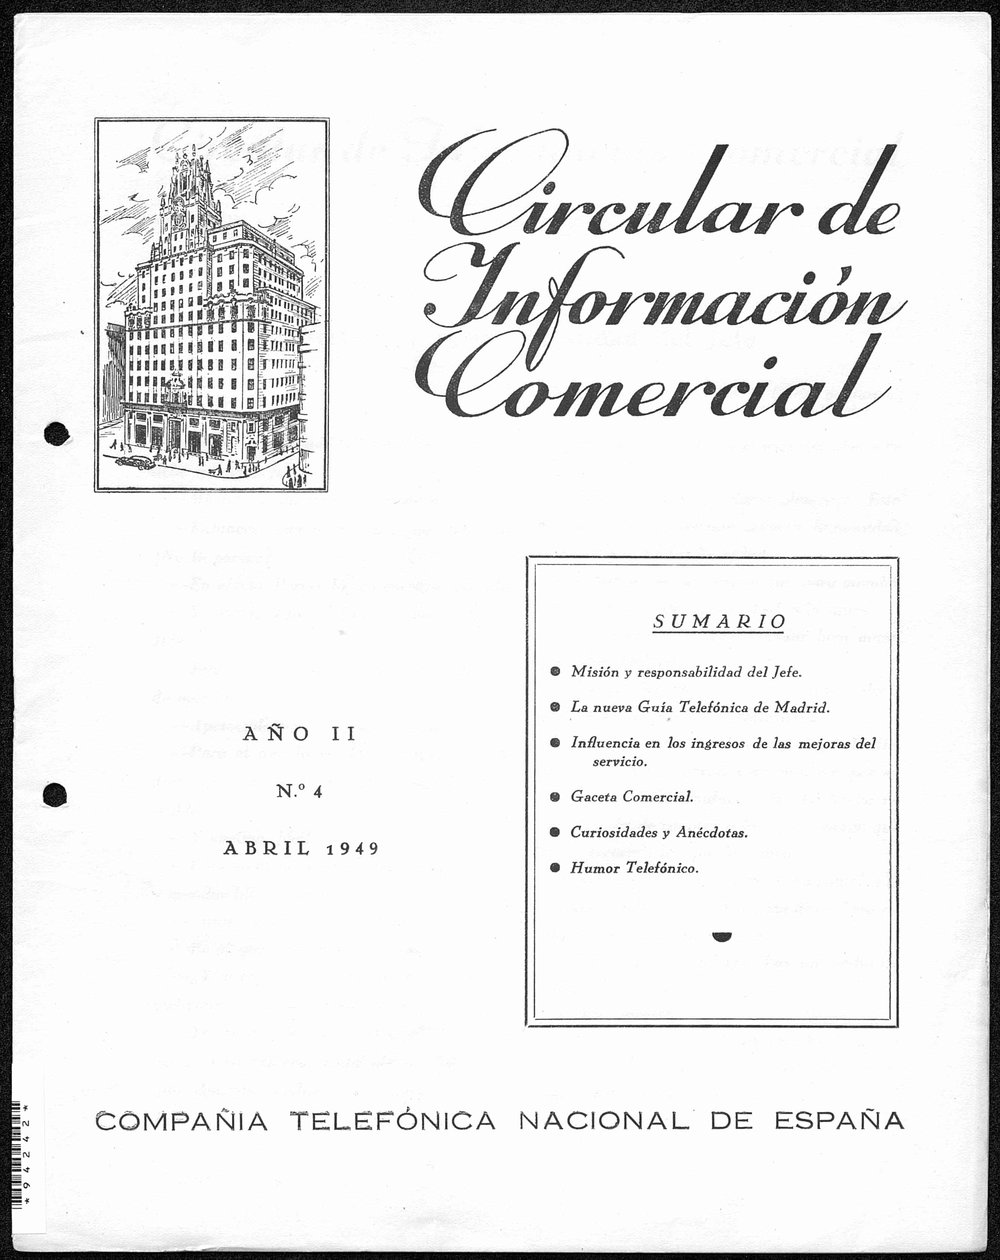 COMMERCIAL INFORMATION CIRCULAR. YEAR II, NUMBER 4 - APRIL